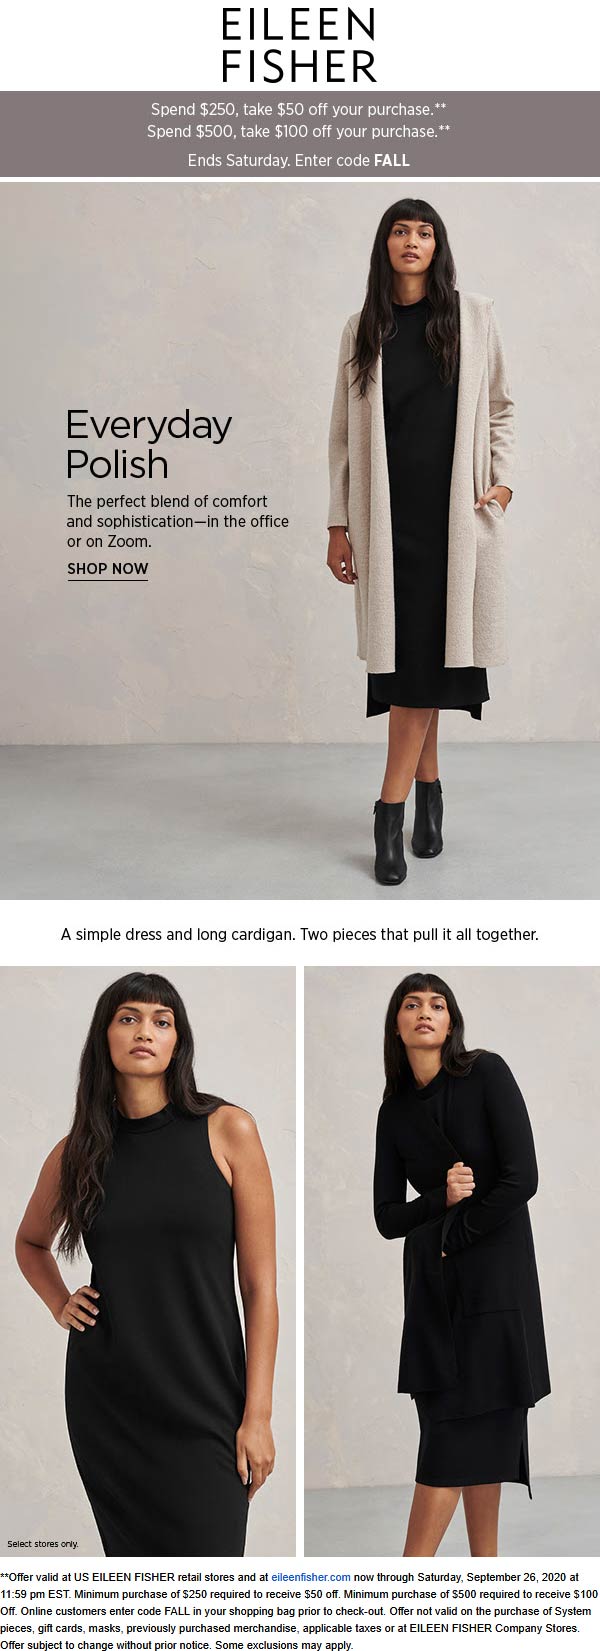 Eileen Fisher stores Coupon  $50 off $250 & more at Eileen Fisher, or online via promo code FALL #eileenfisher 